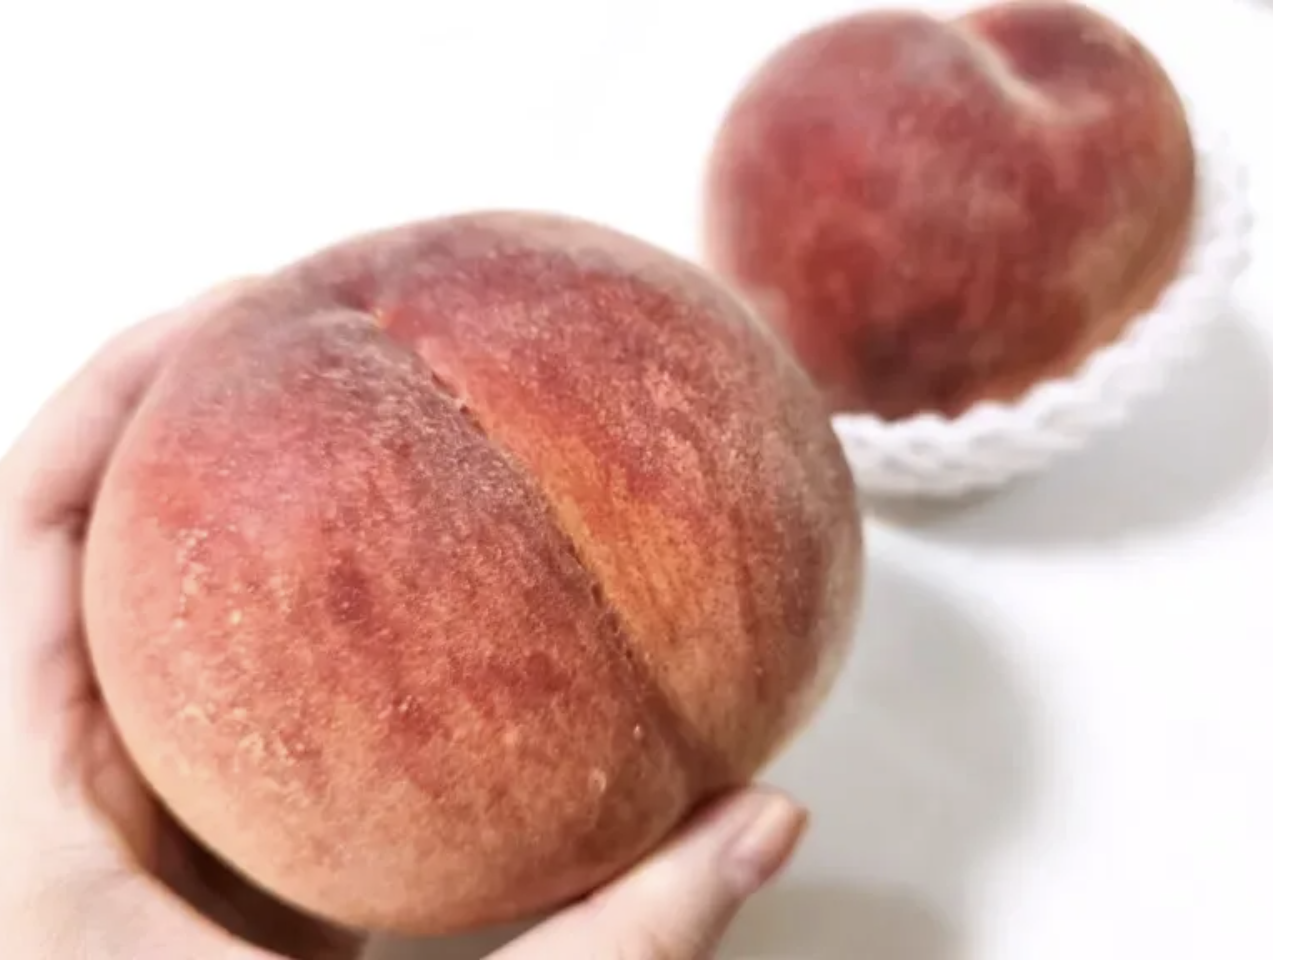 Peachy keen life hack! Japan’s Zen-Noh shares an ingeniously easy way to pit a peach in seconds